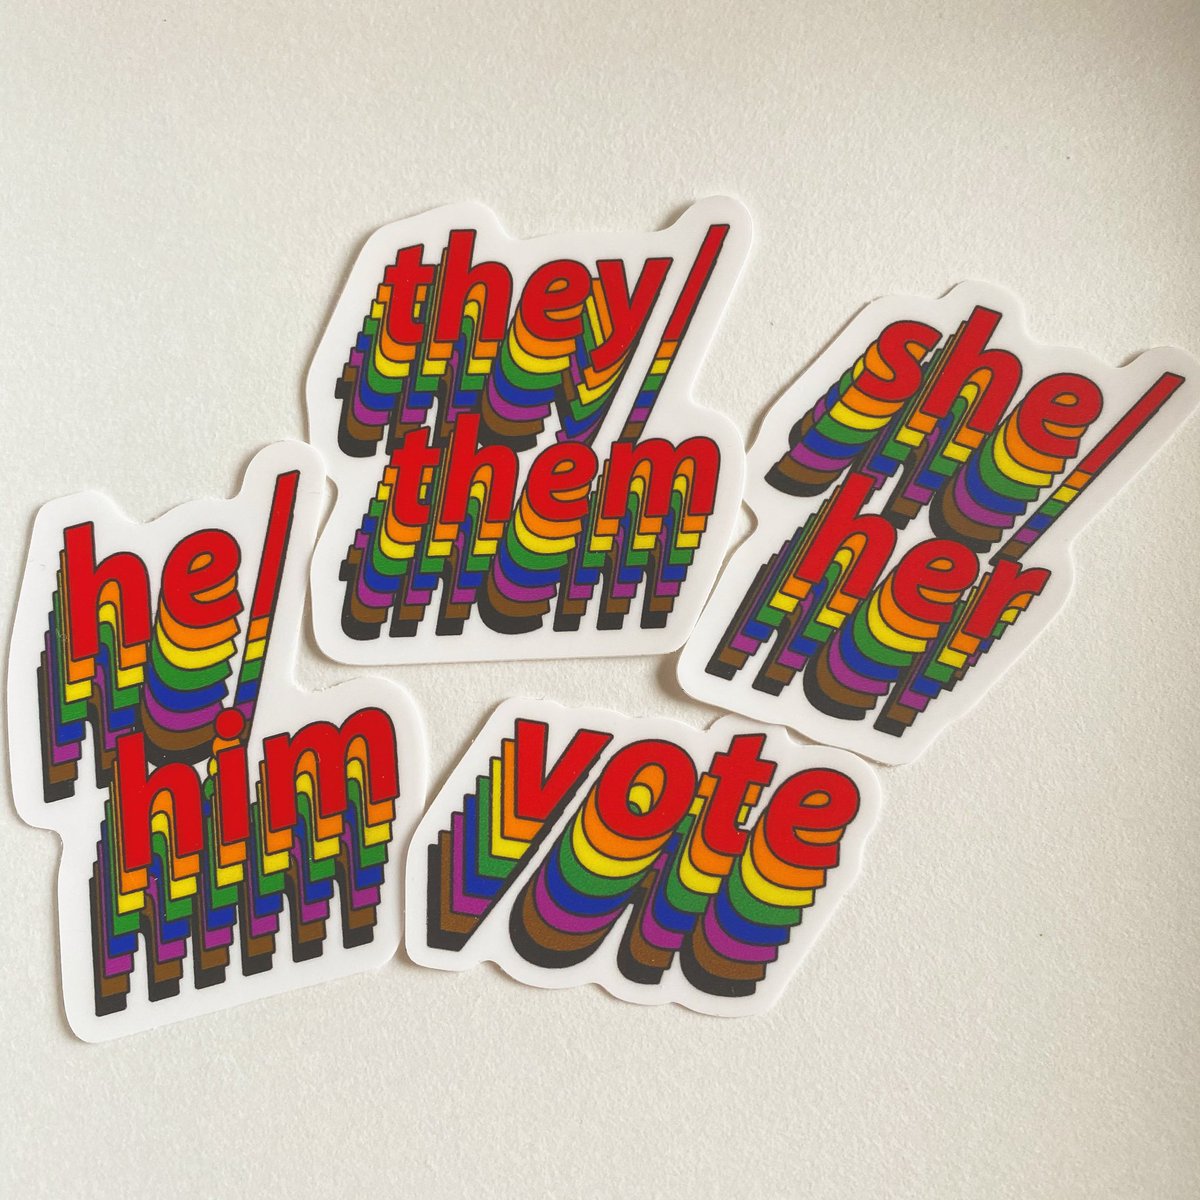 I recently created stickers of different pronouns for people to wear and share. And I included a vote sticker in this batch too! Both issues are different but very important to me year round - especially in such an important time for the LGBTQ community. 